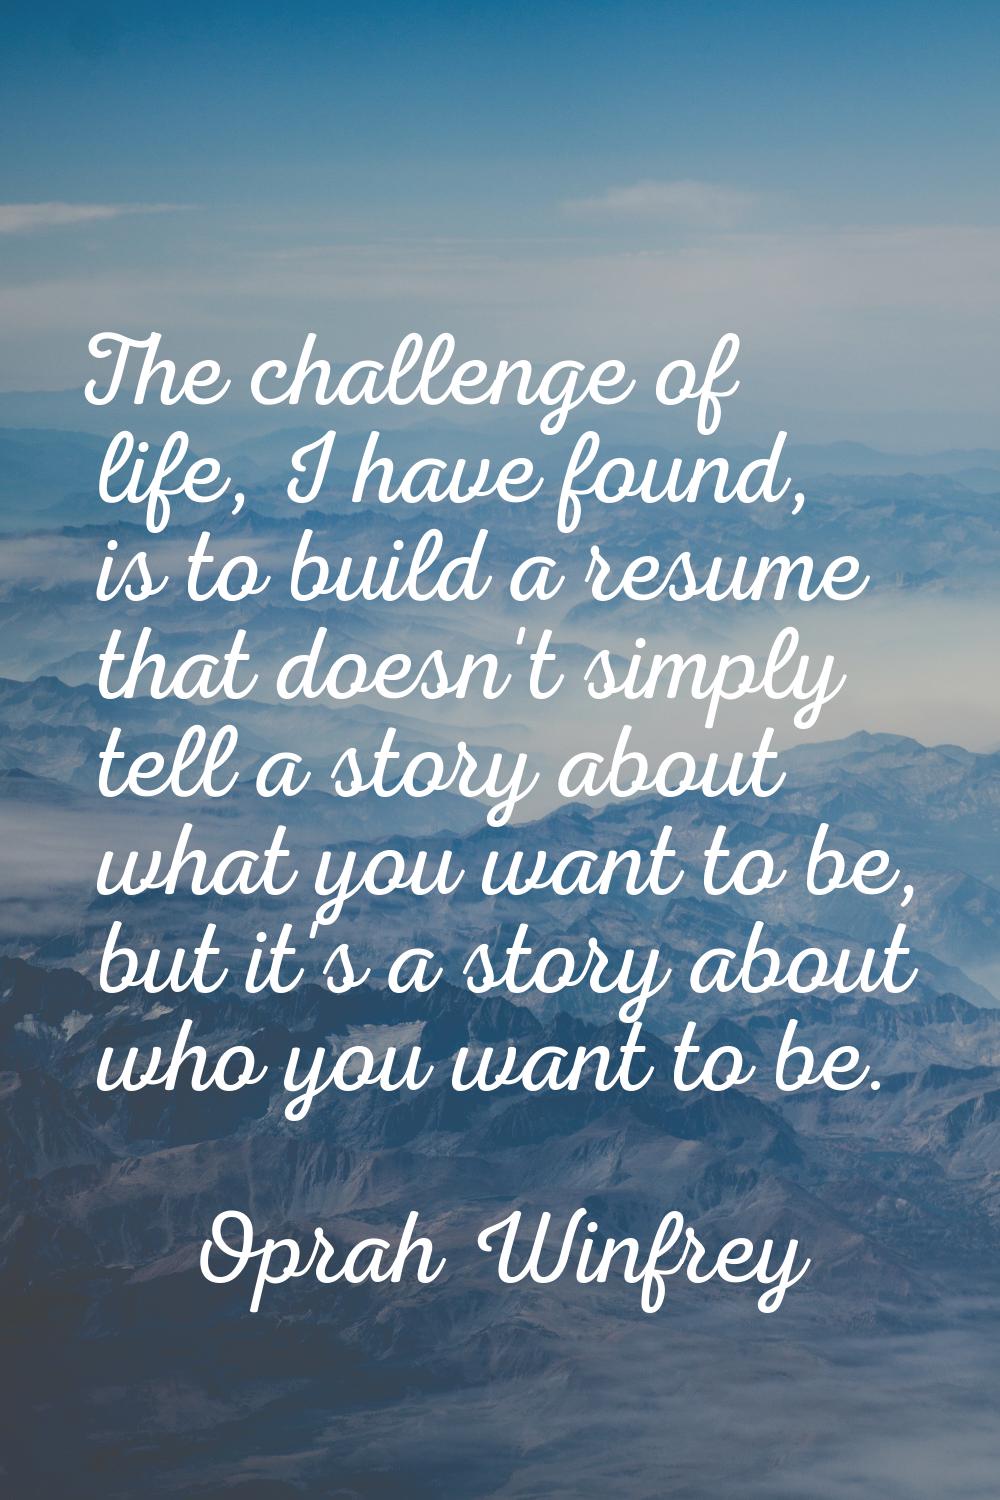 The challenge of life, I have found, is to build a resume that doesn't simply tell a story about wh